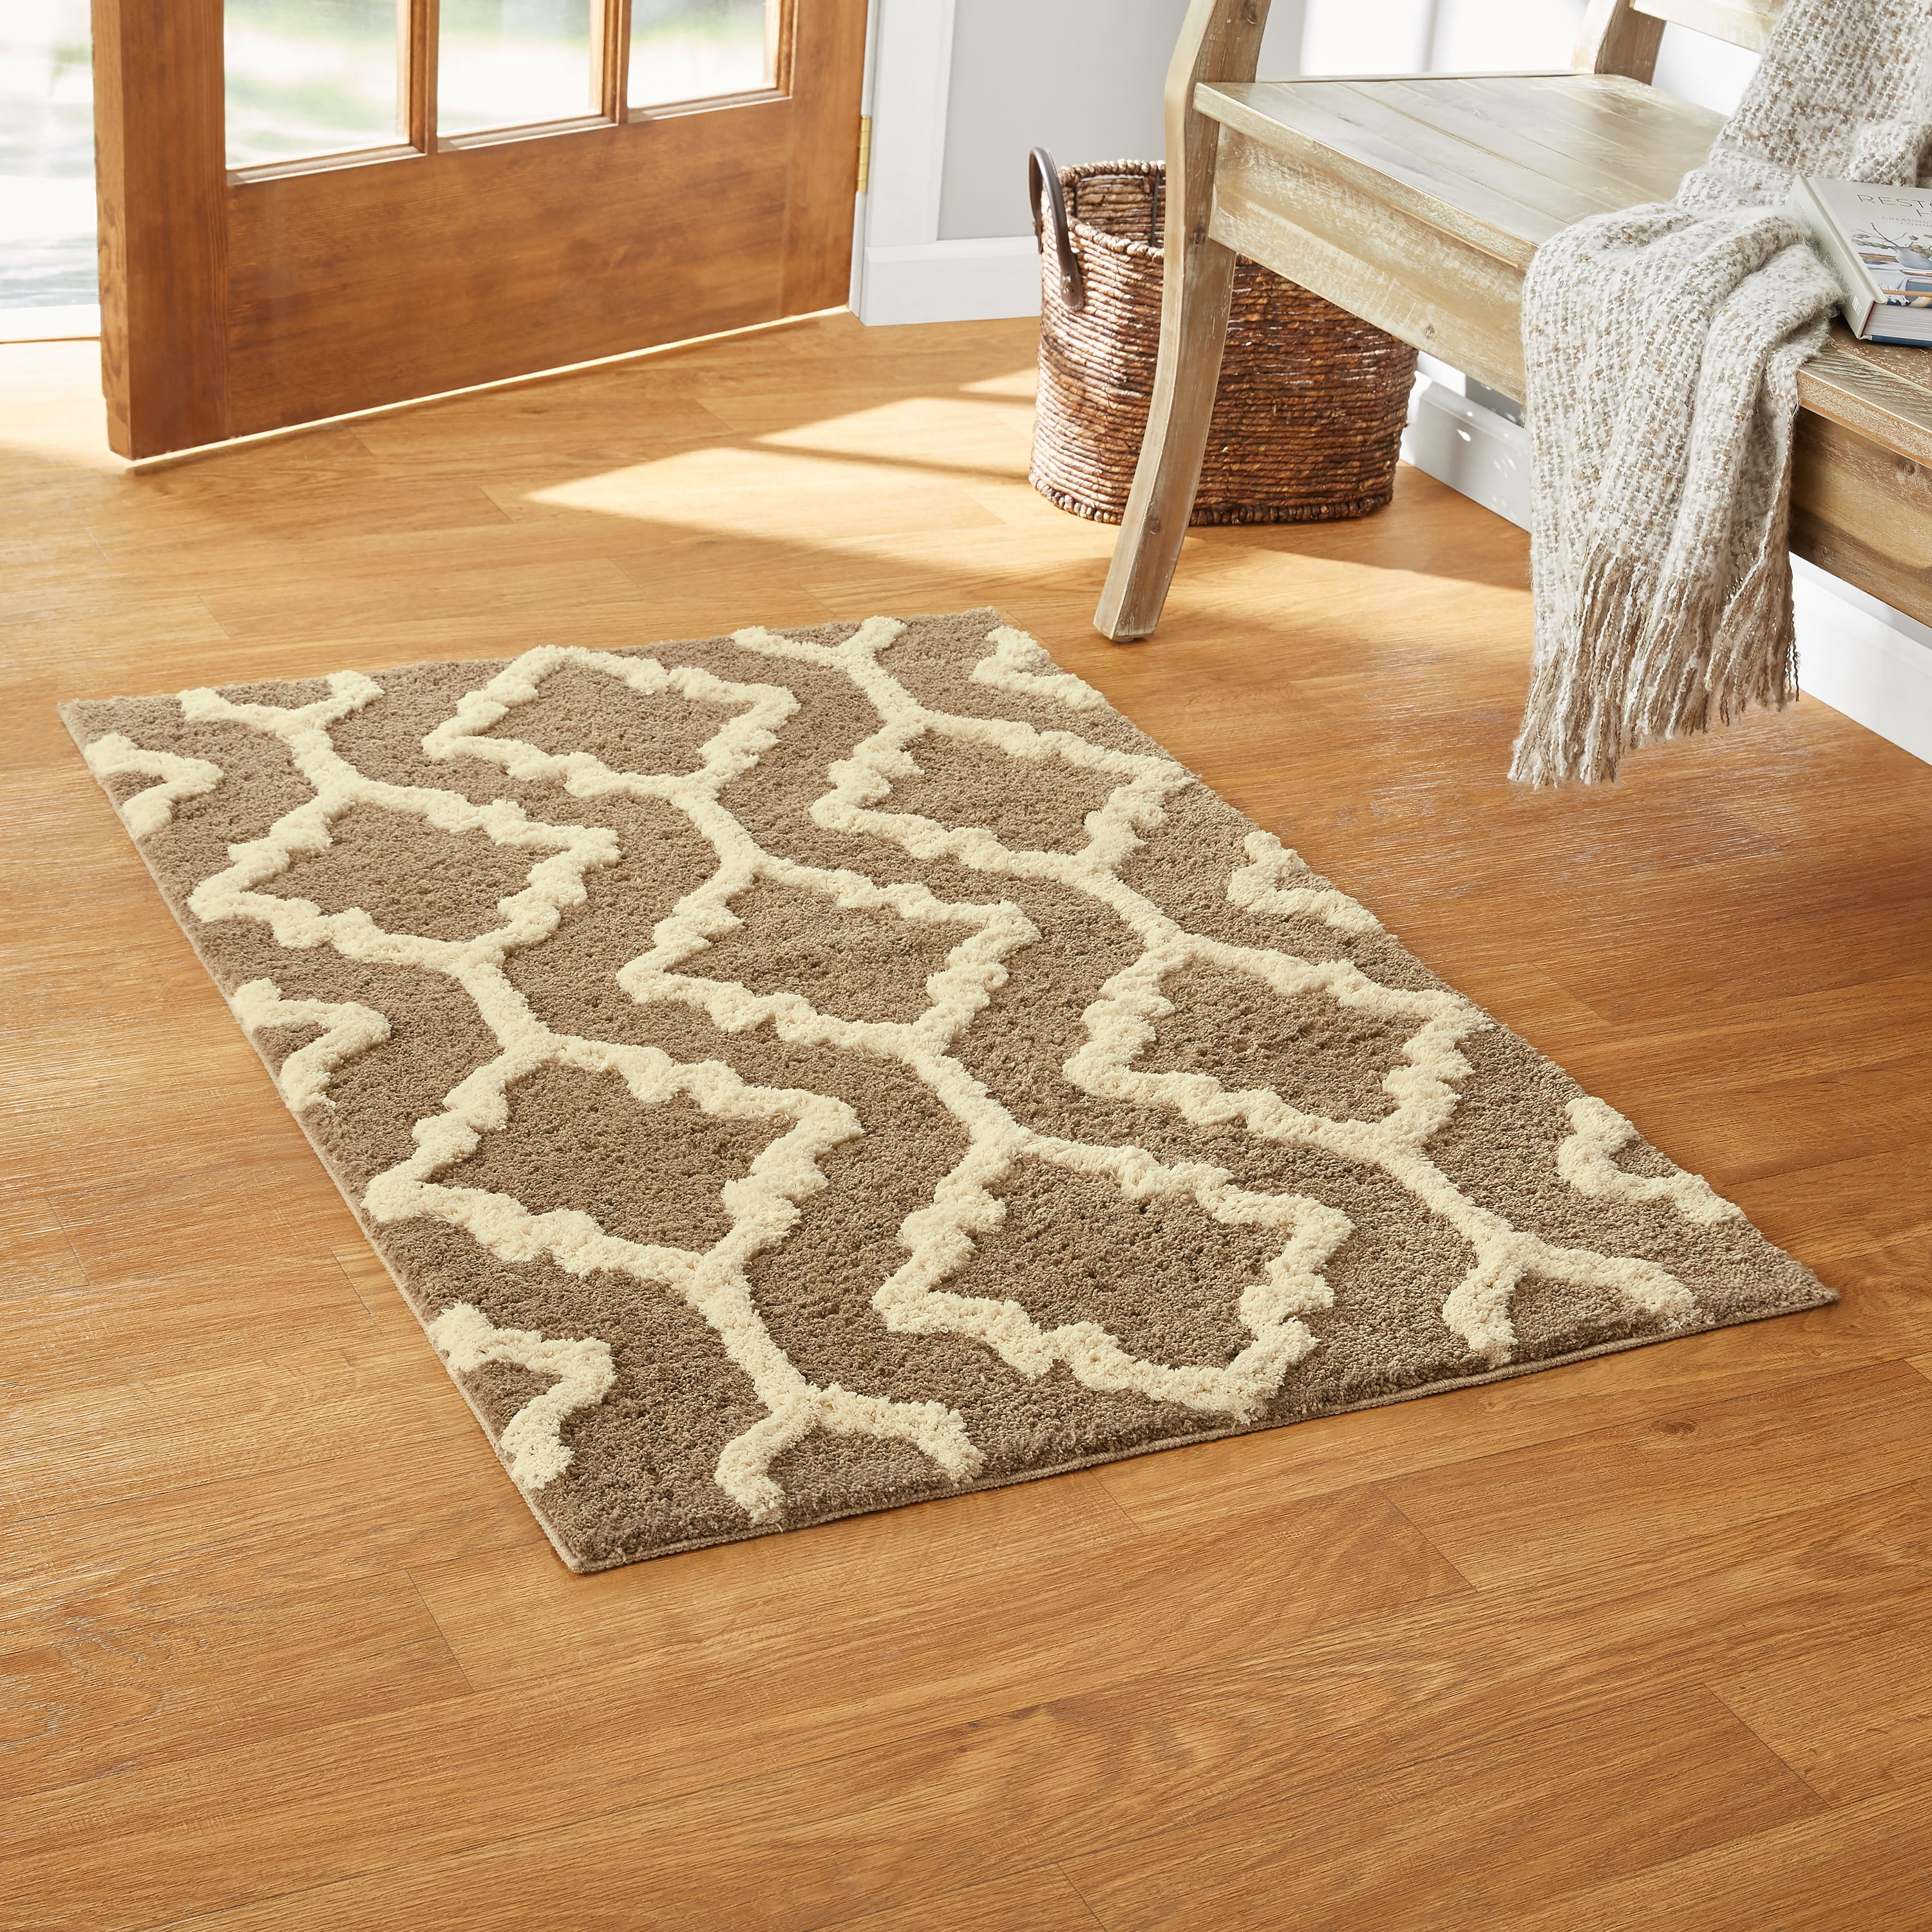 Taupe Geo Polyester Rug, Better Homes And Gardens Geo Waves Textured Print Area Rugs